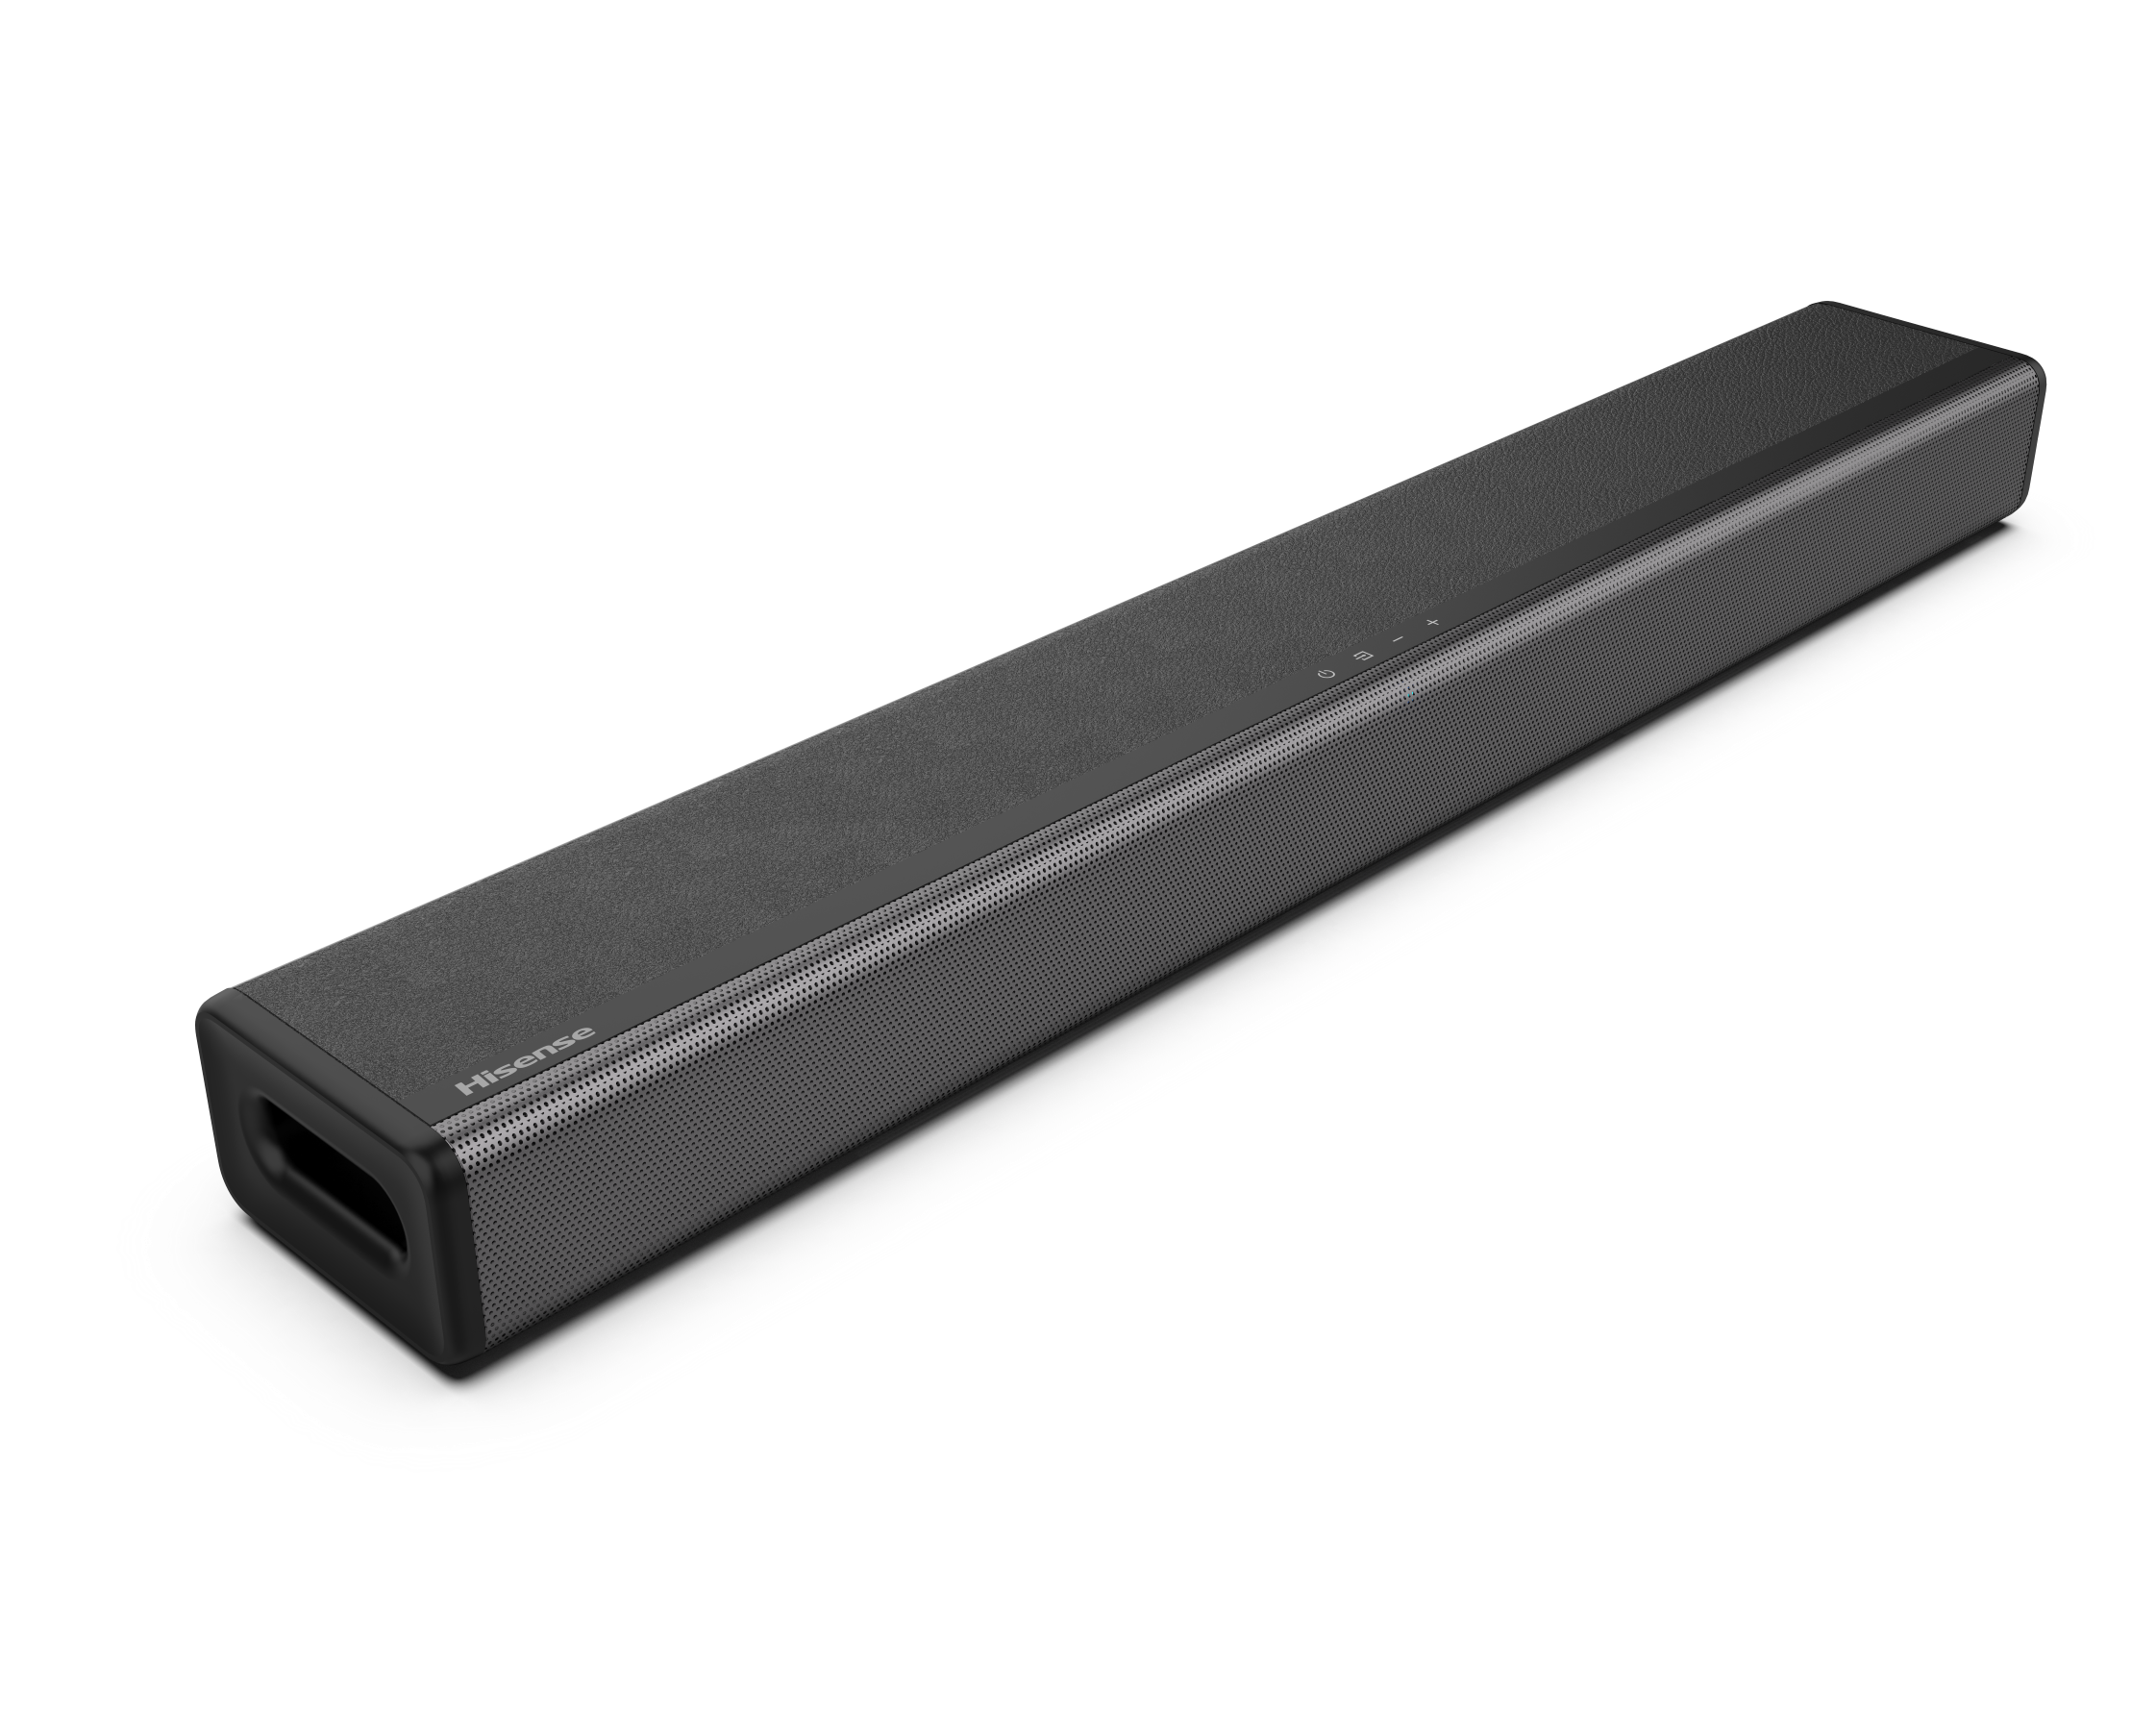 Hisense HS214 2.1 Channel Sound Bar with Built-in Subwoofer - image 1 of 15